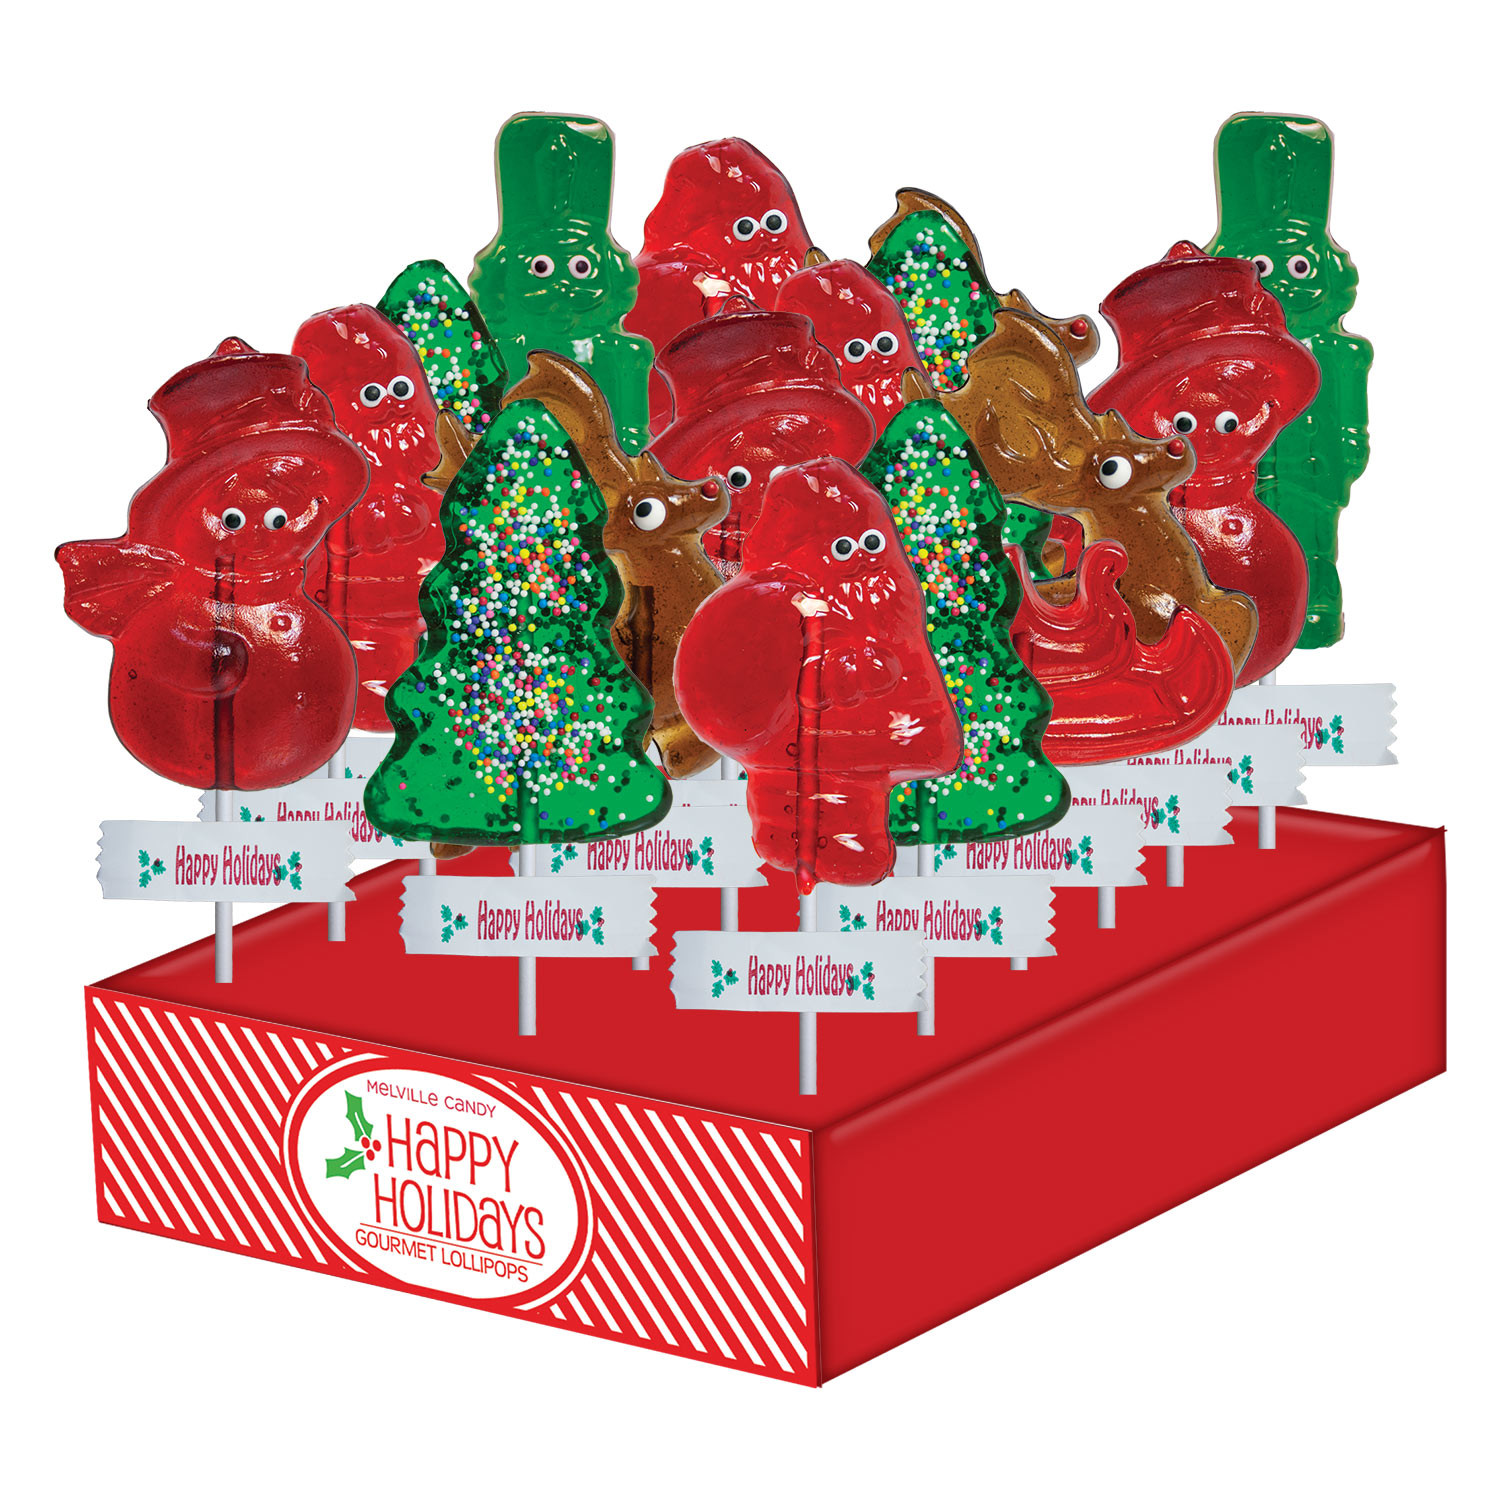 Classic Christmas Candy
 Classic Christmas Lollipop Assortment by Melville Candy